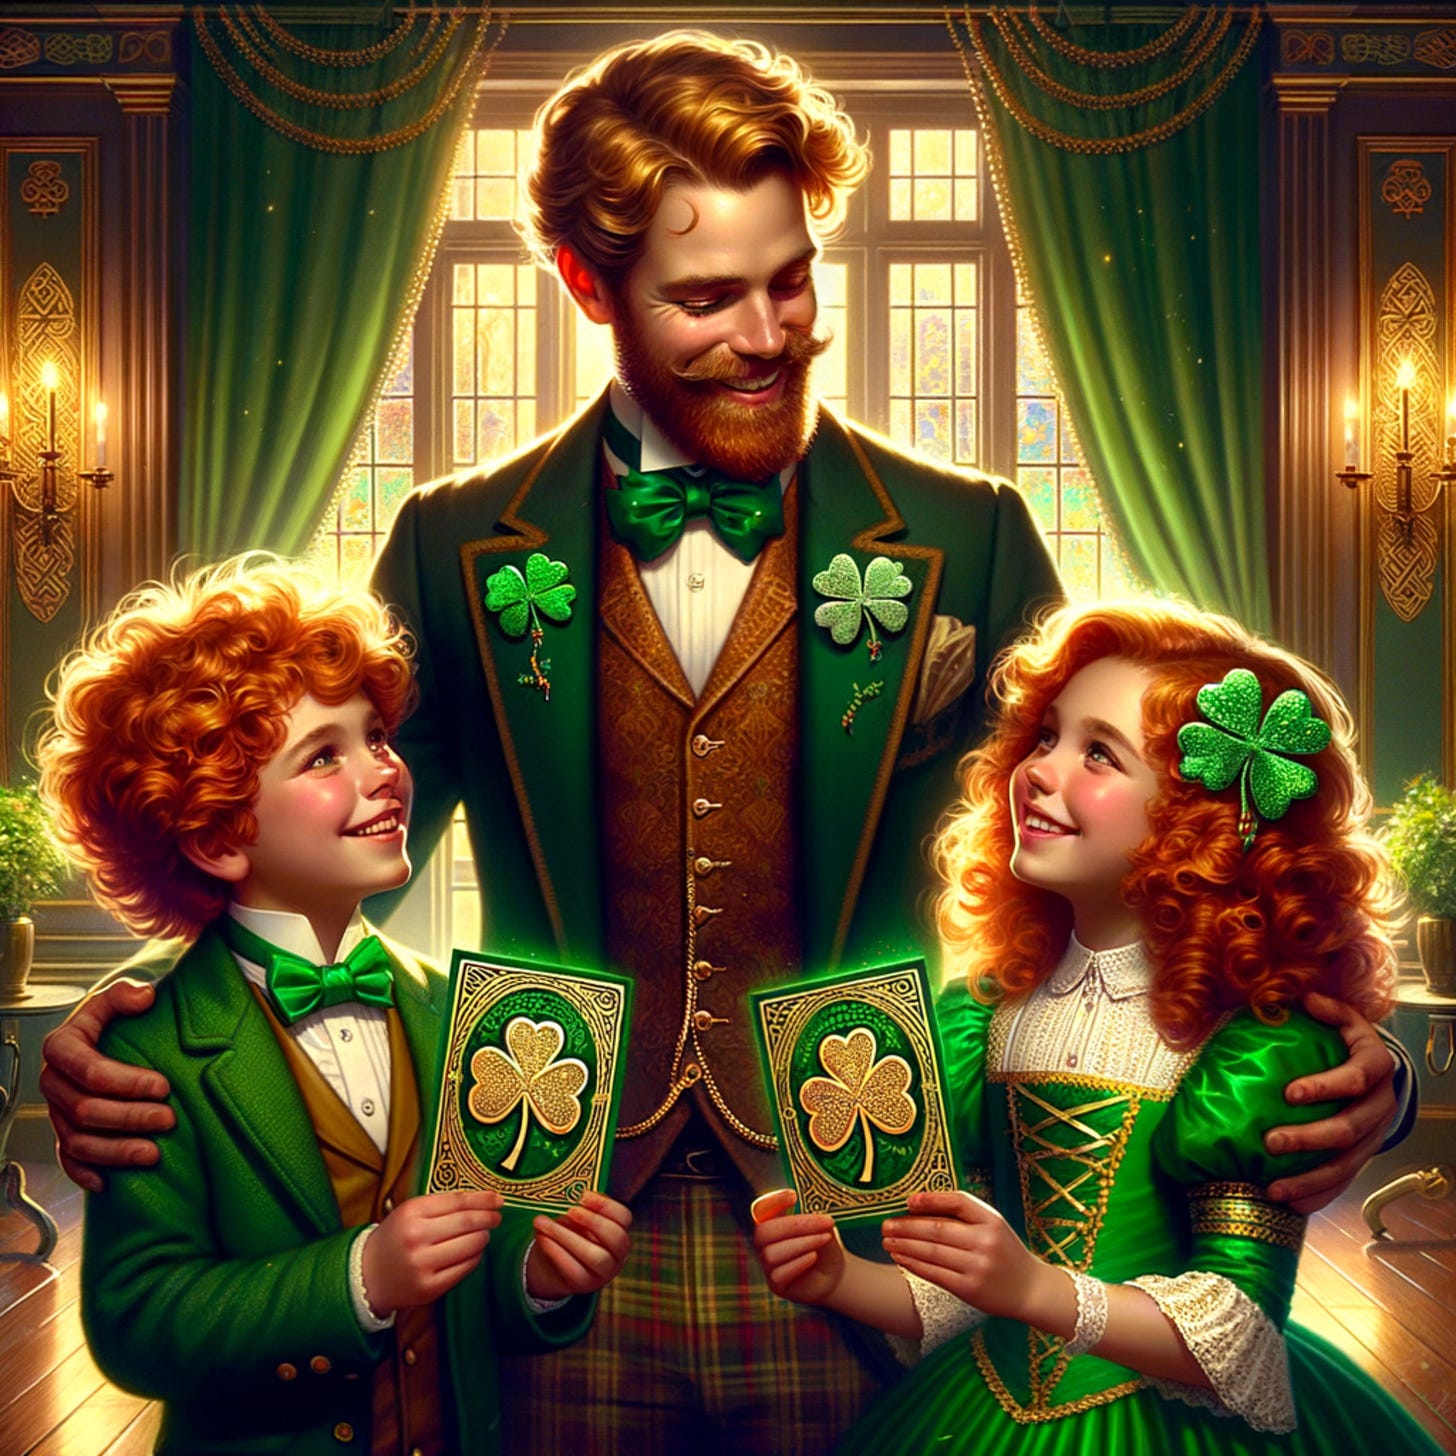 This image features three characters in a richly detailed, warm indoor setting that has an old-fashioned, perhaps Victorian, feel to it. The central figure is a man with a full beard, a friendly smile, and wavy hair. He wears a dark green suit jacket with a patterned green vest underneath, a crisp white shirt, and a bright green bow tie. On his jacket lapel is a shamrock pin, suggesting an Irish theme or a St. Patrick's Day celebration.  To his right is a young girl with vibrant, curly red hair adorned with a green headband that has a shamrock decoration. She is dressed in a festive, green dress with a lighter green apron or front piece that laces up with a golden cord. Her dress also has puff sleeves and a white frill at the collar. She is holding a large playing card, also with a shamrock on it, and is gazing up at the man with a look of adoration or deep affection.  On the man's other side is a young boy, also with curly red hair and a beaming smile. He is dressed in a green suit matching the man's in color and style, complete with a bow tie and a shamrock pin on his lapel. He, too, holds a large playing card featuring a shamrock.  Behind them, the room is ornate with wood paneling, patterned wallpaper, heavy drapery, and tasseled tiebacks at the windows, which let in a golden light. The windows are adorned with stained glass at the top, lending an air of grandeur to the scene. Overall, the image conveys a sense of joy, warmth, and celebration, heavily themed around Irish culture.